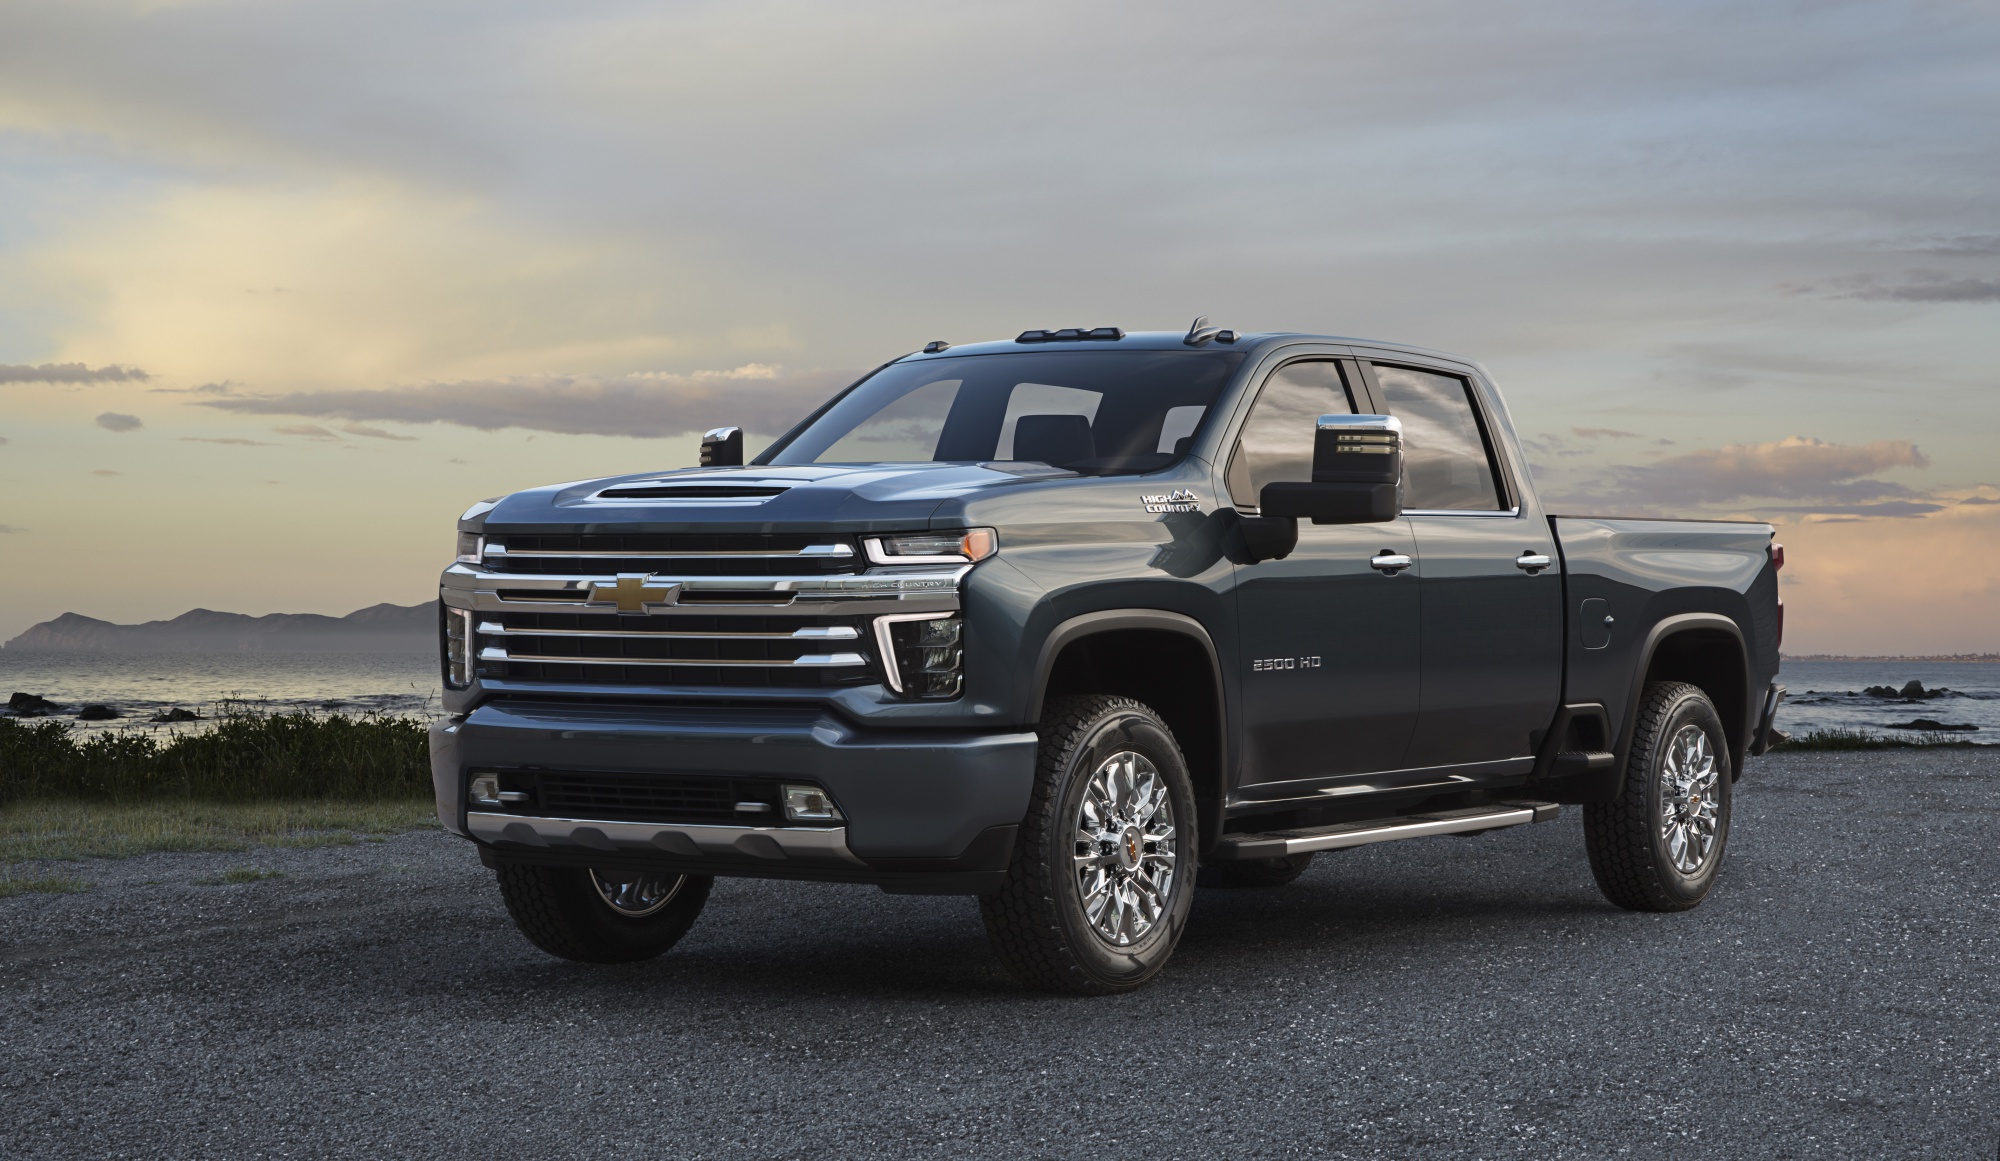 Chevy Silverado Pickup Trucks Will Pay for GM's Electric Future - Bloomberg